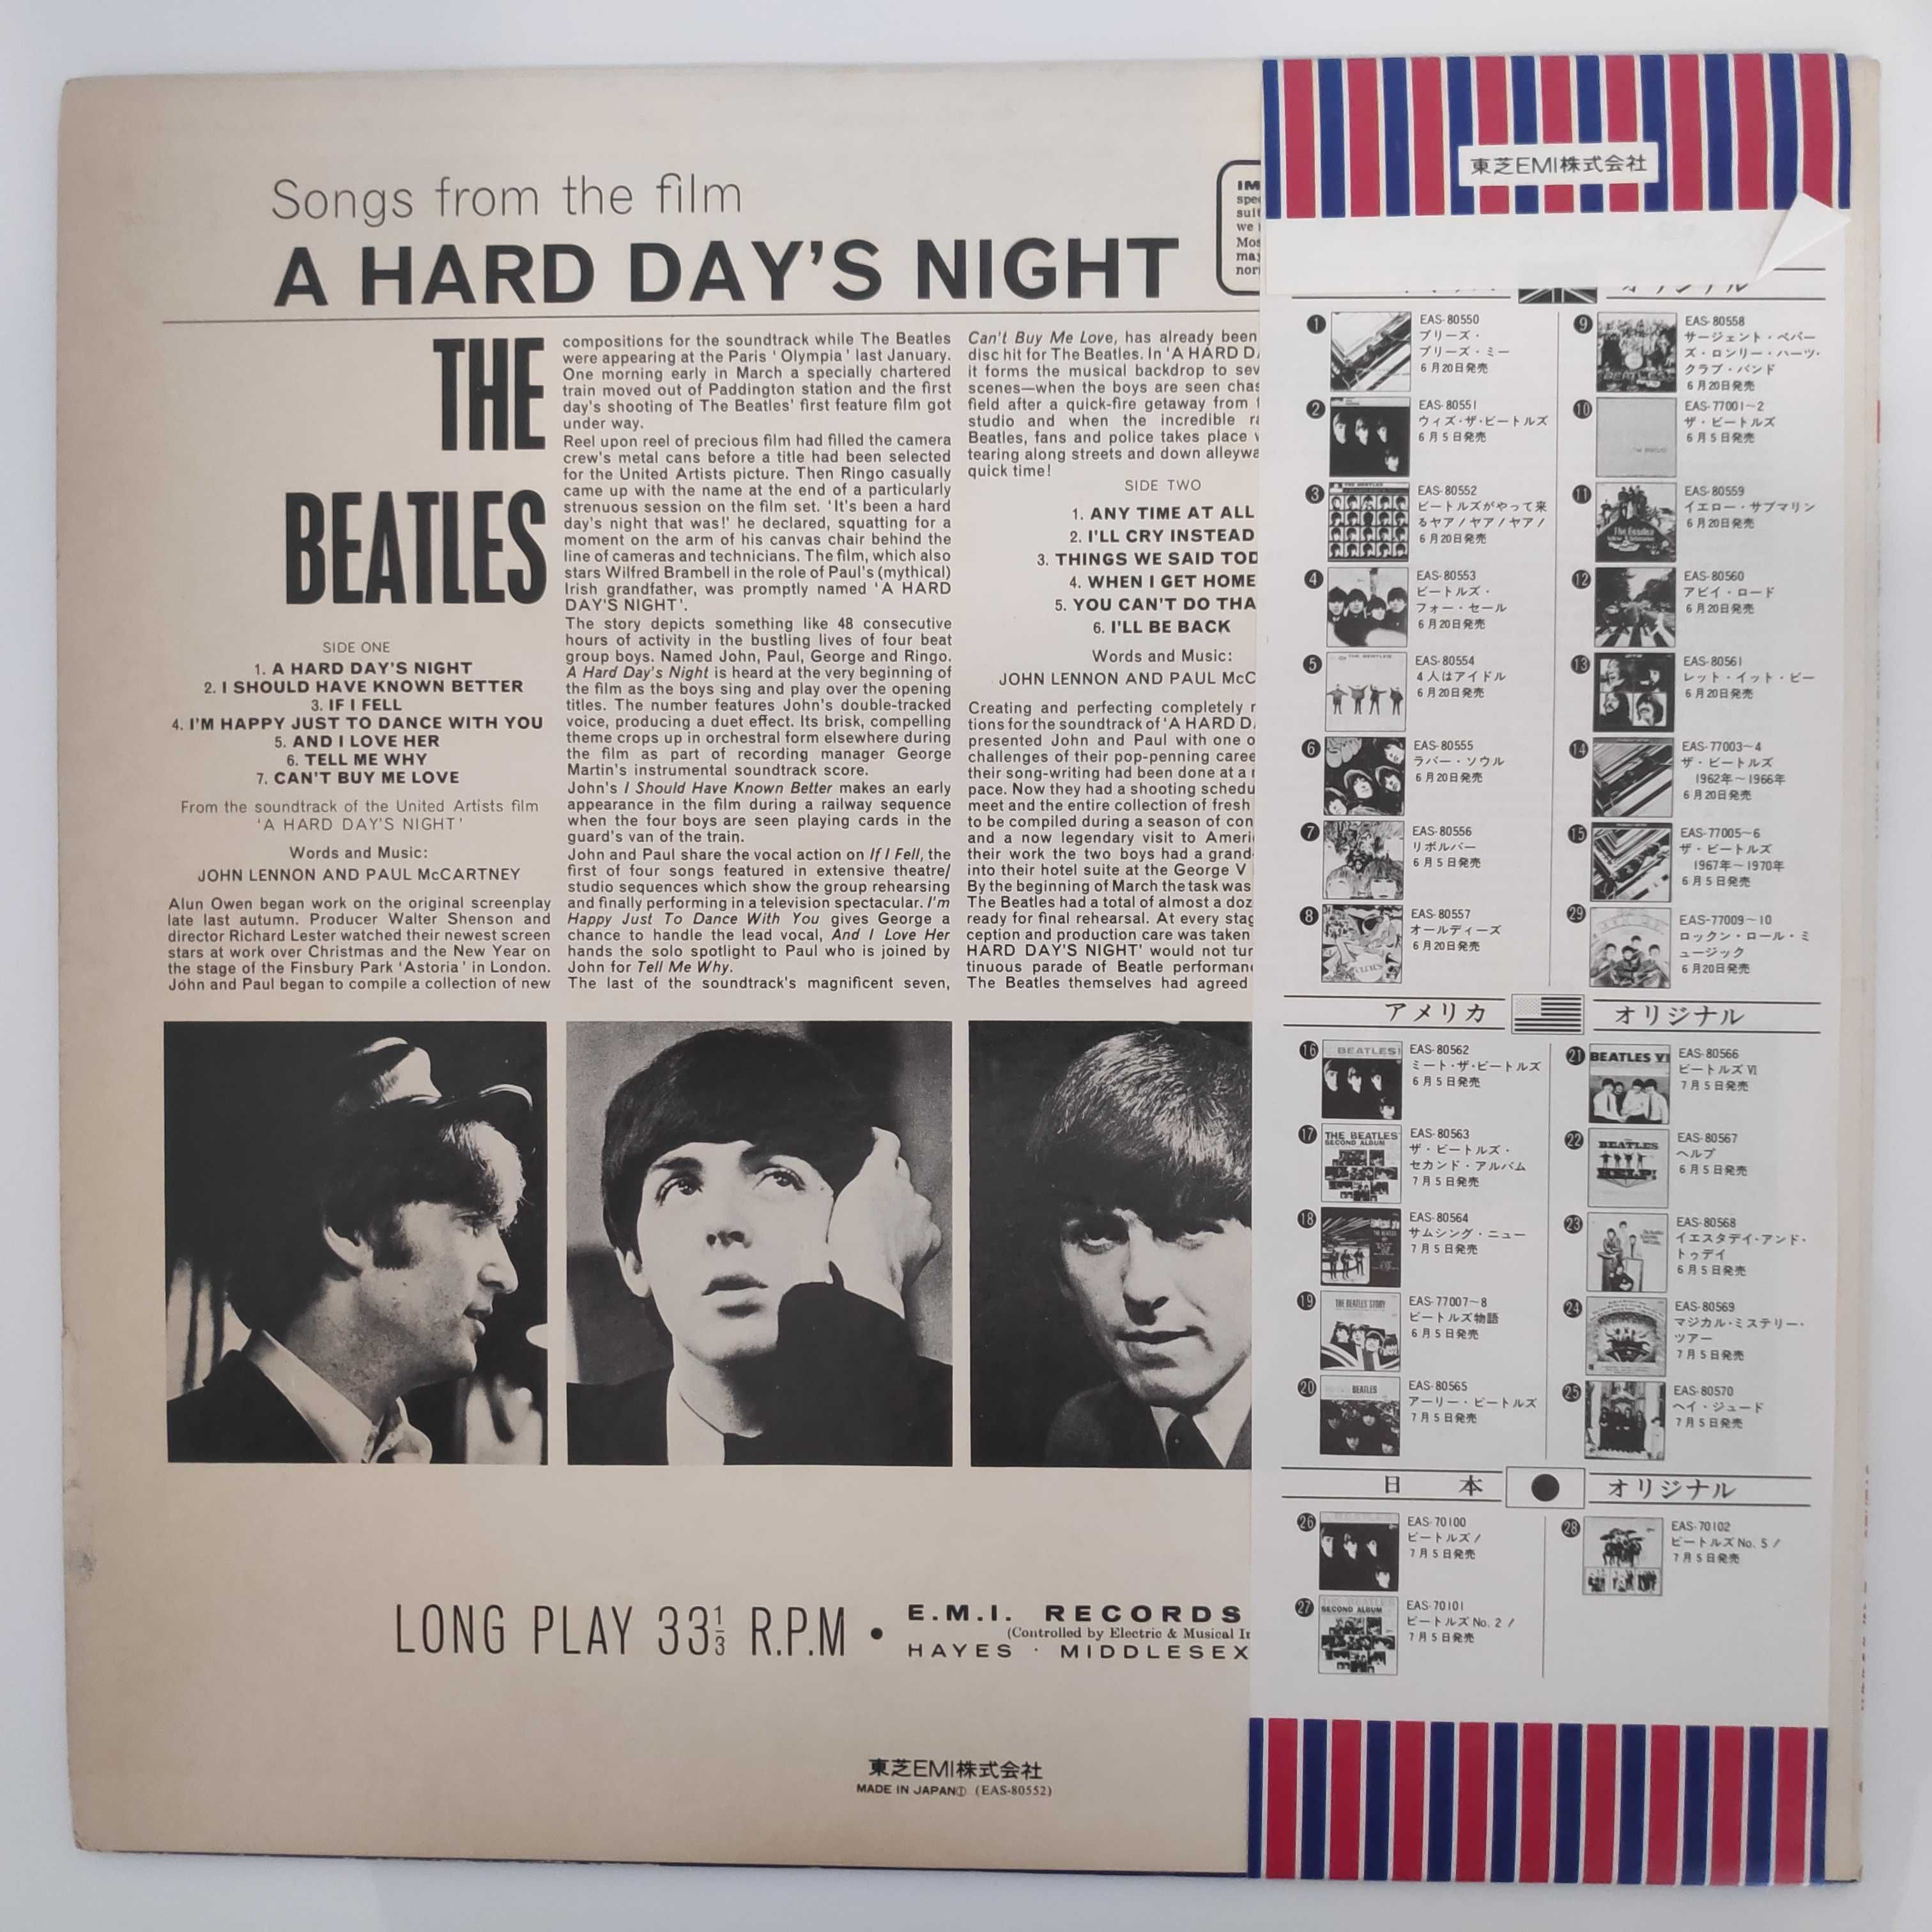 The Beatles – A Hard Day's Night